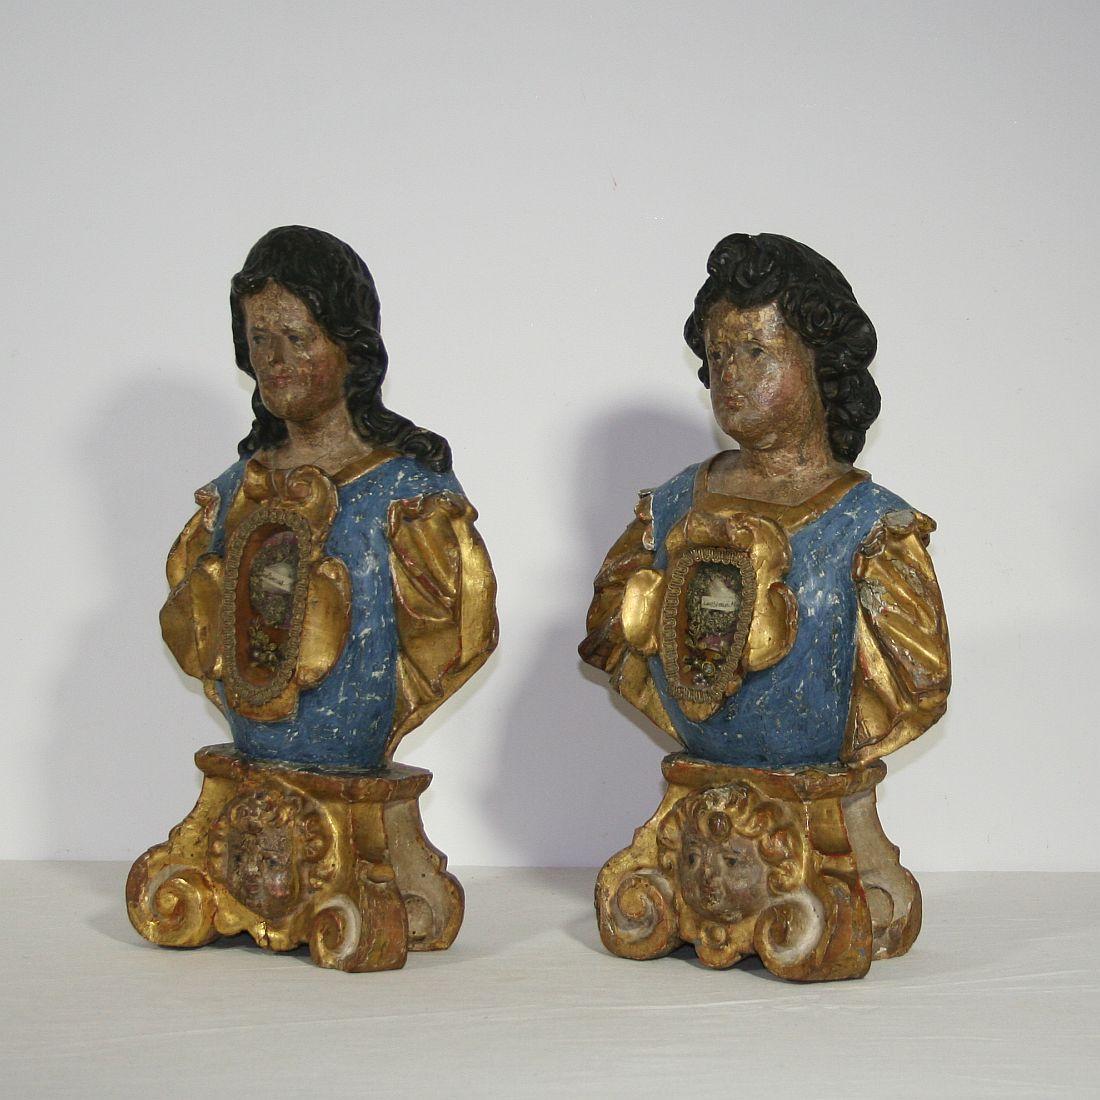 Baroque Pair of 17th Century Italian Carved Reliquary Busts